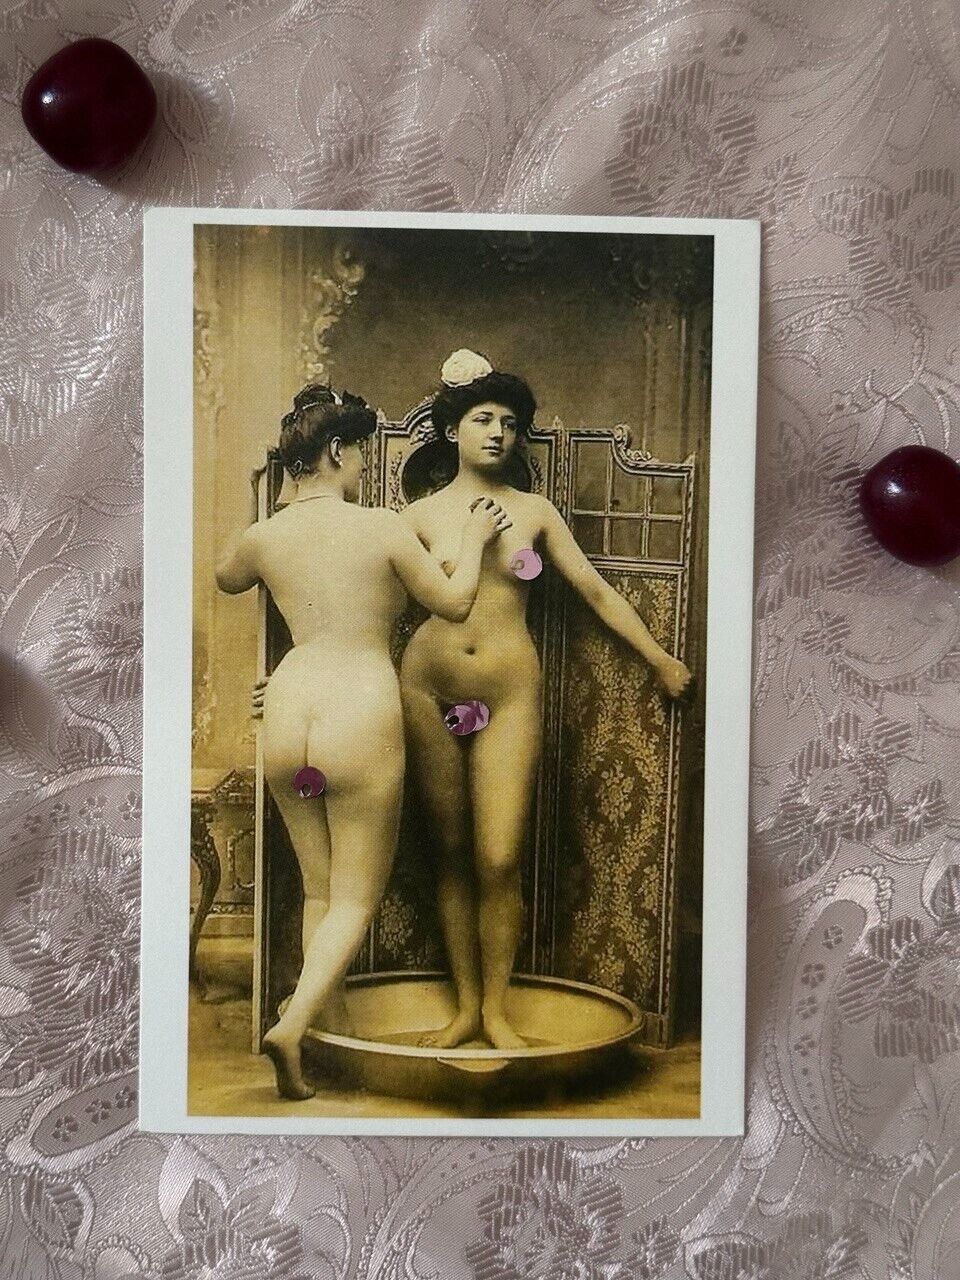 Vintage erotic photo - Spanking Lesbians - early 1900´s REPRODUCTION PRINT